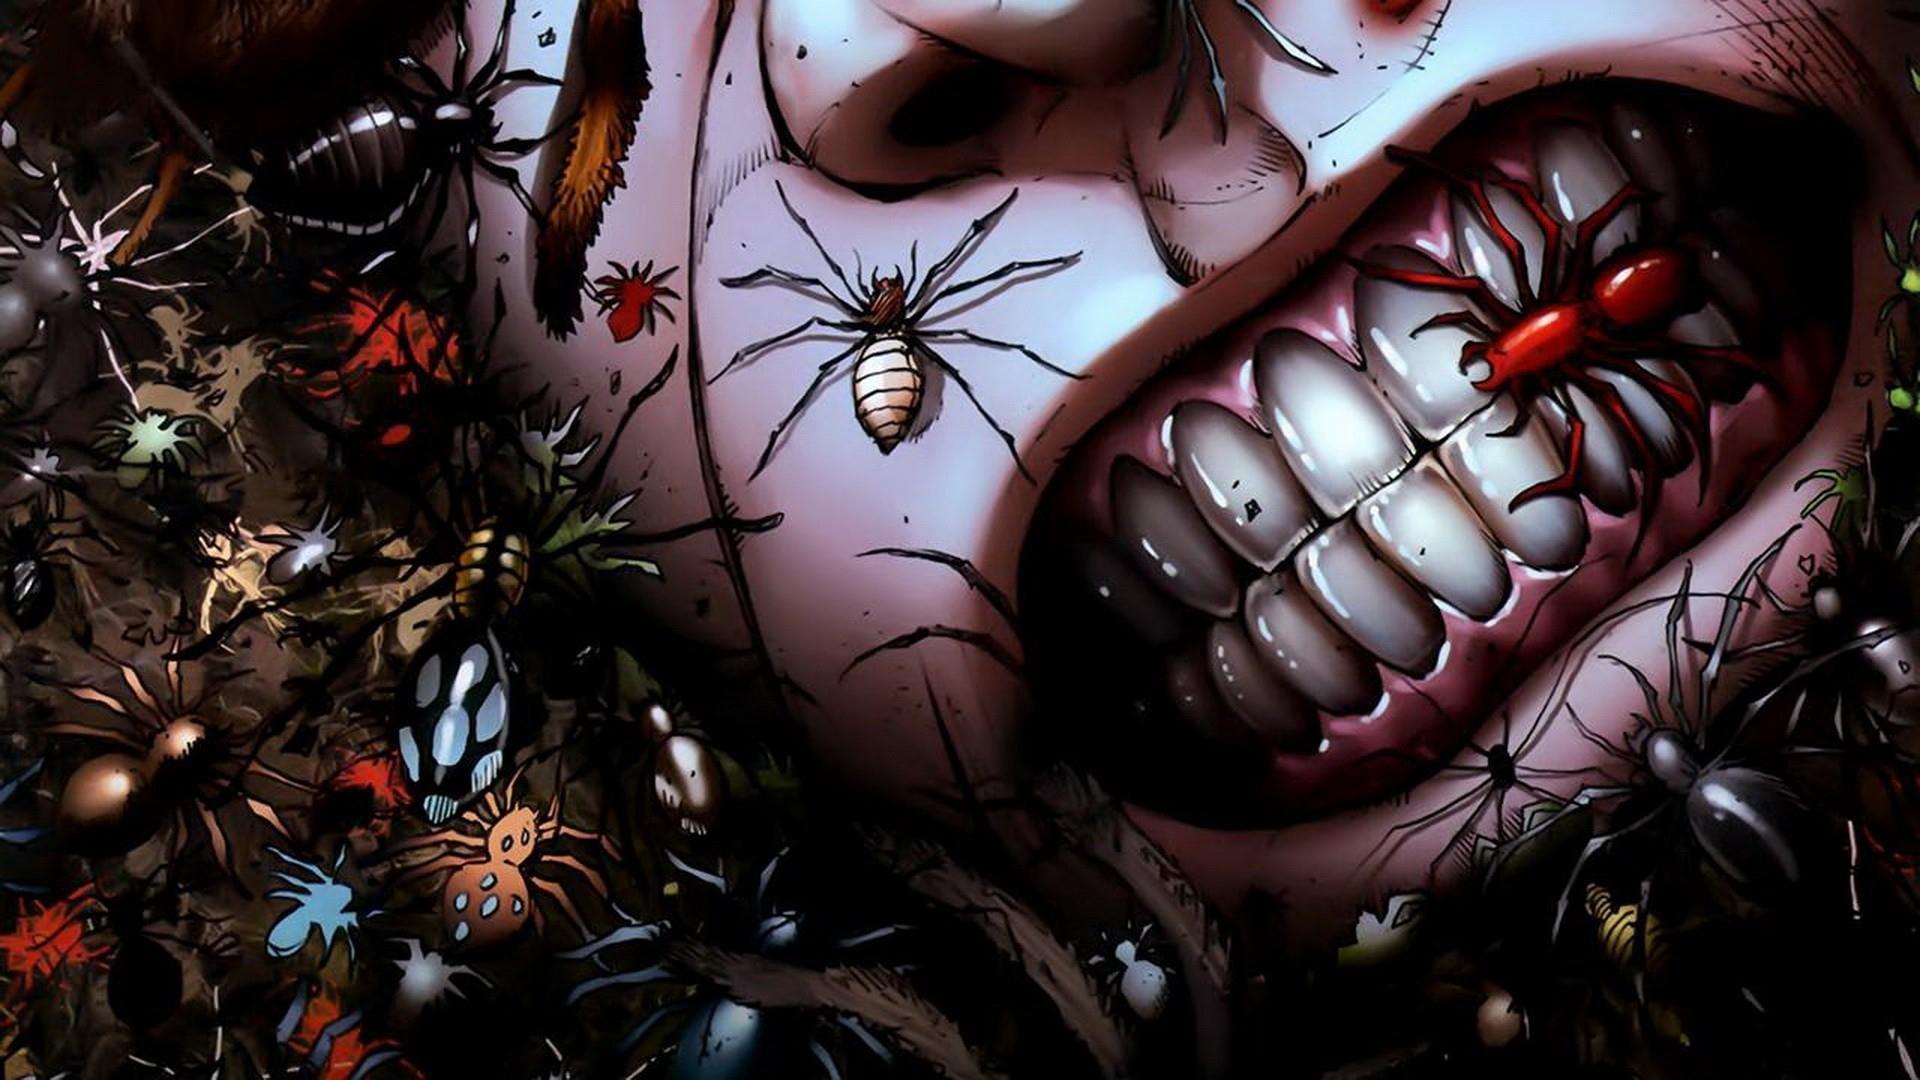 Grimm Fairy Tales Comics Anime Dark Horror Insects Spider Grimace Gross Spooky Creepy Scary Wallpaperx1080